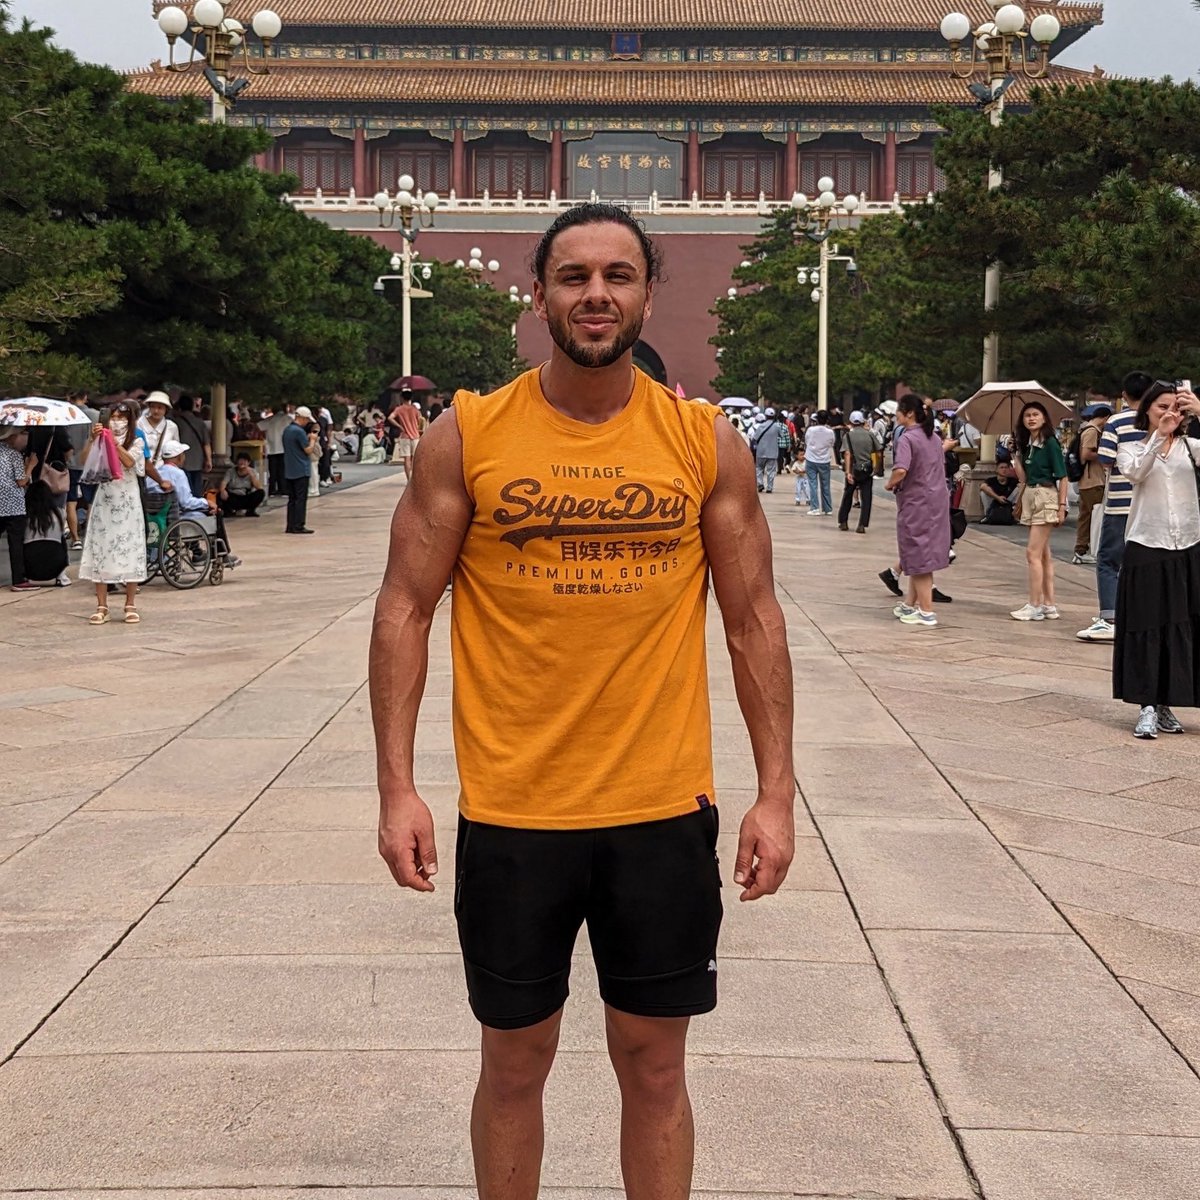 Xièxiè China, what a unique experience. 

Now the focus is on #njpwTAMASHII this Friday night in Sydney!

#TMDK VS #NaturalClassics